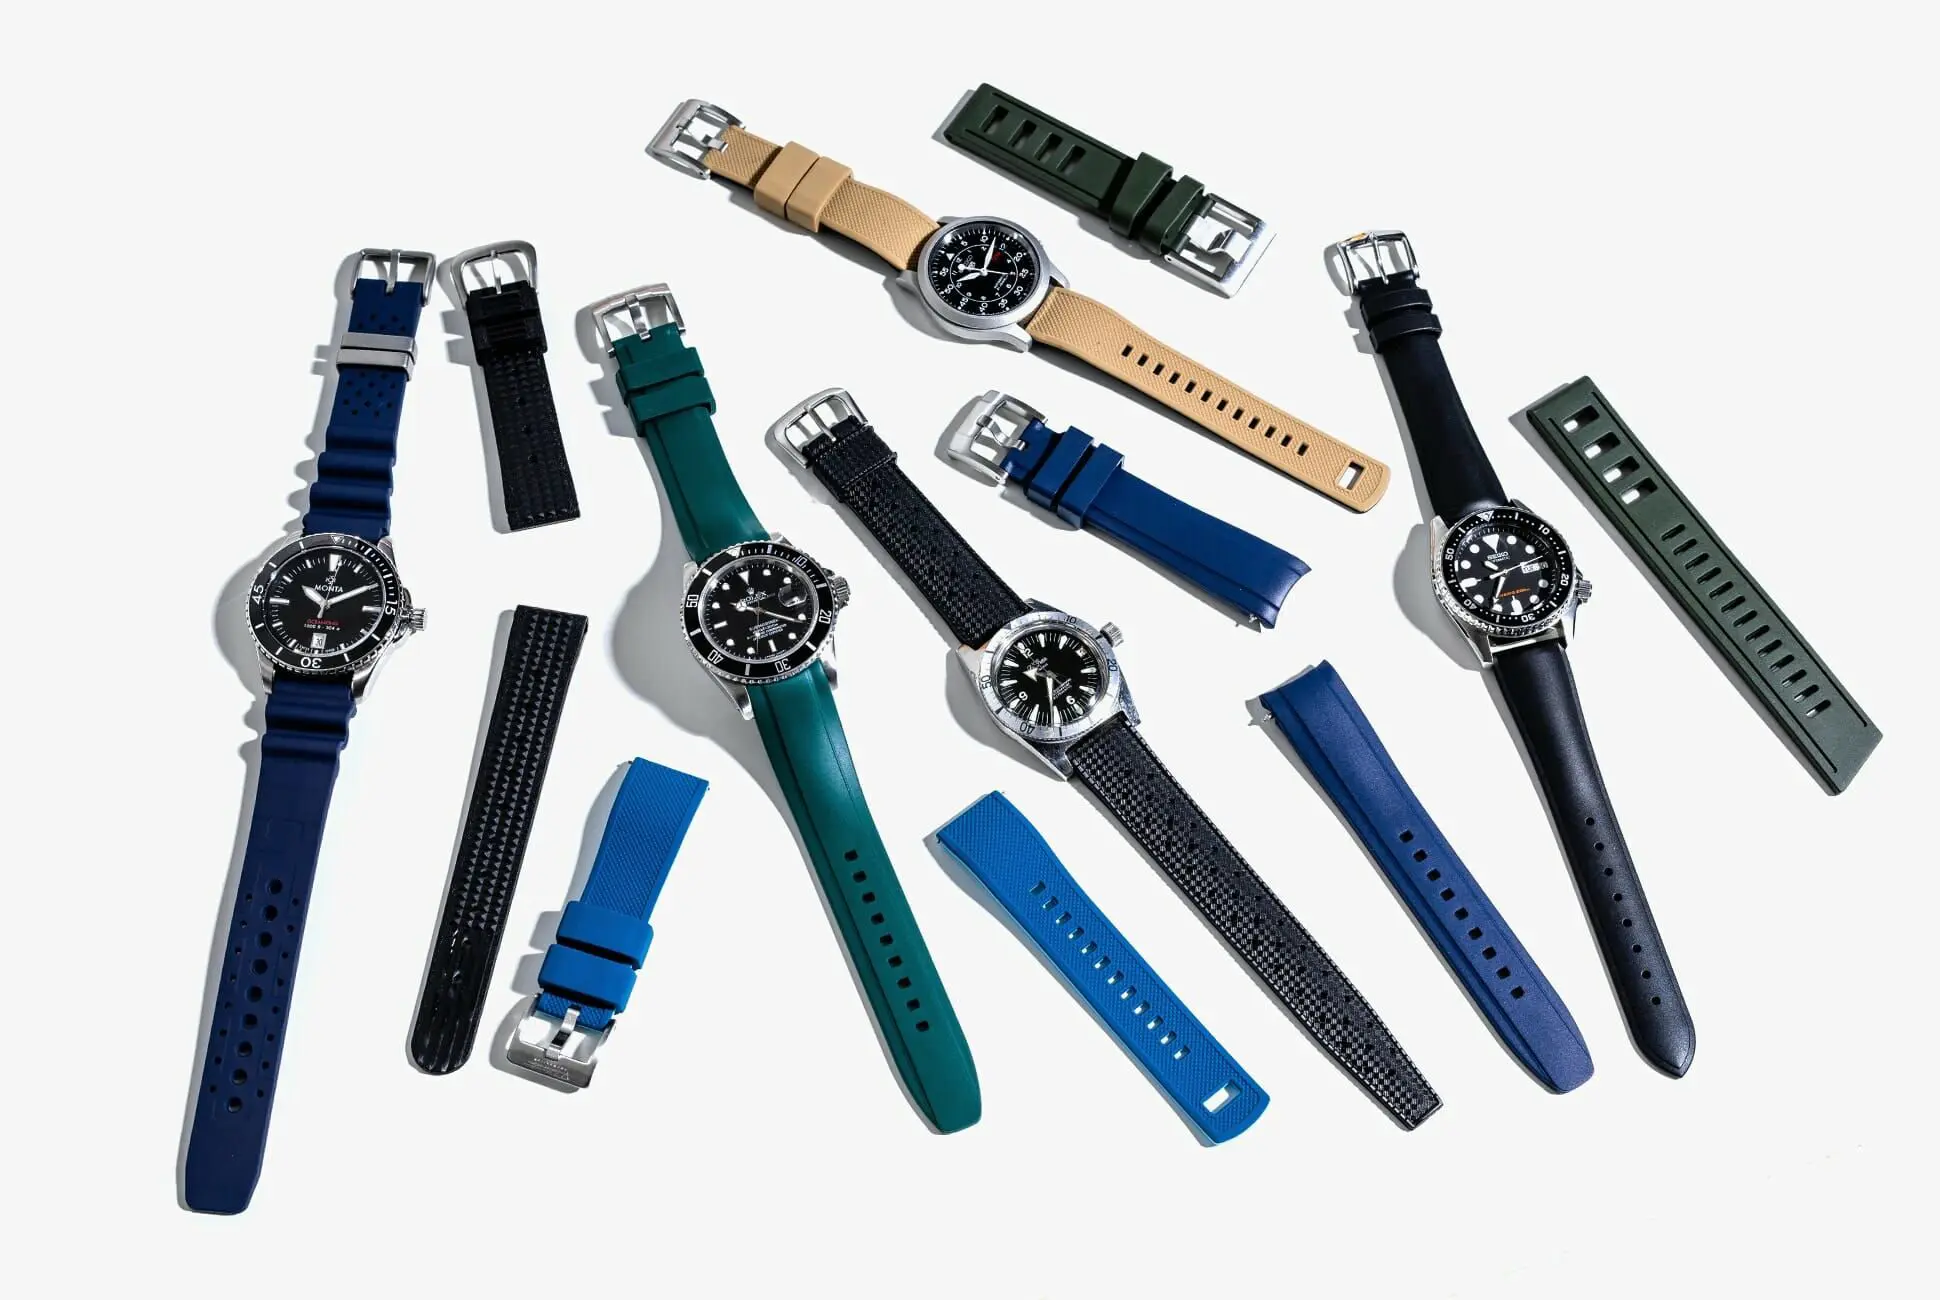 Five of the vey best sports watches on rubber straps